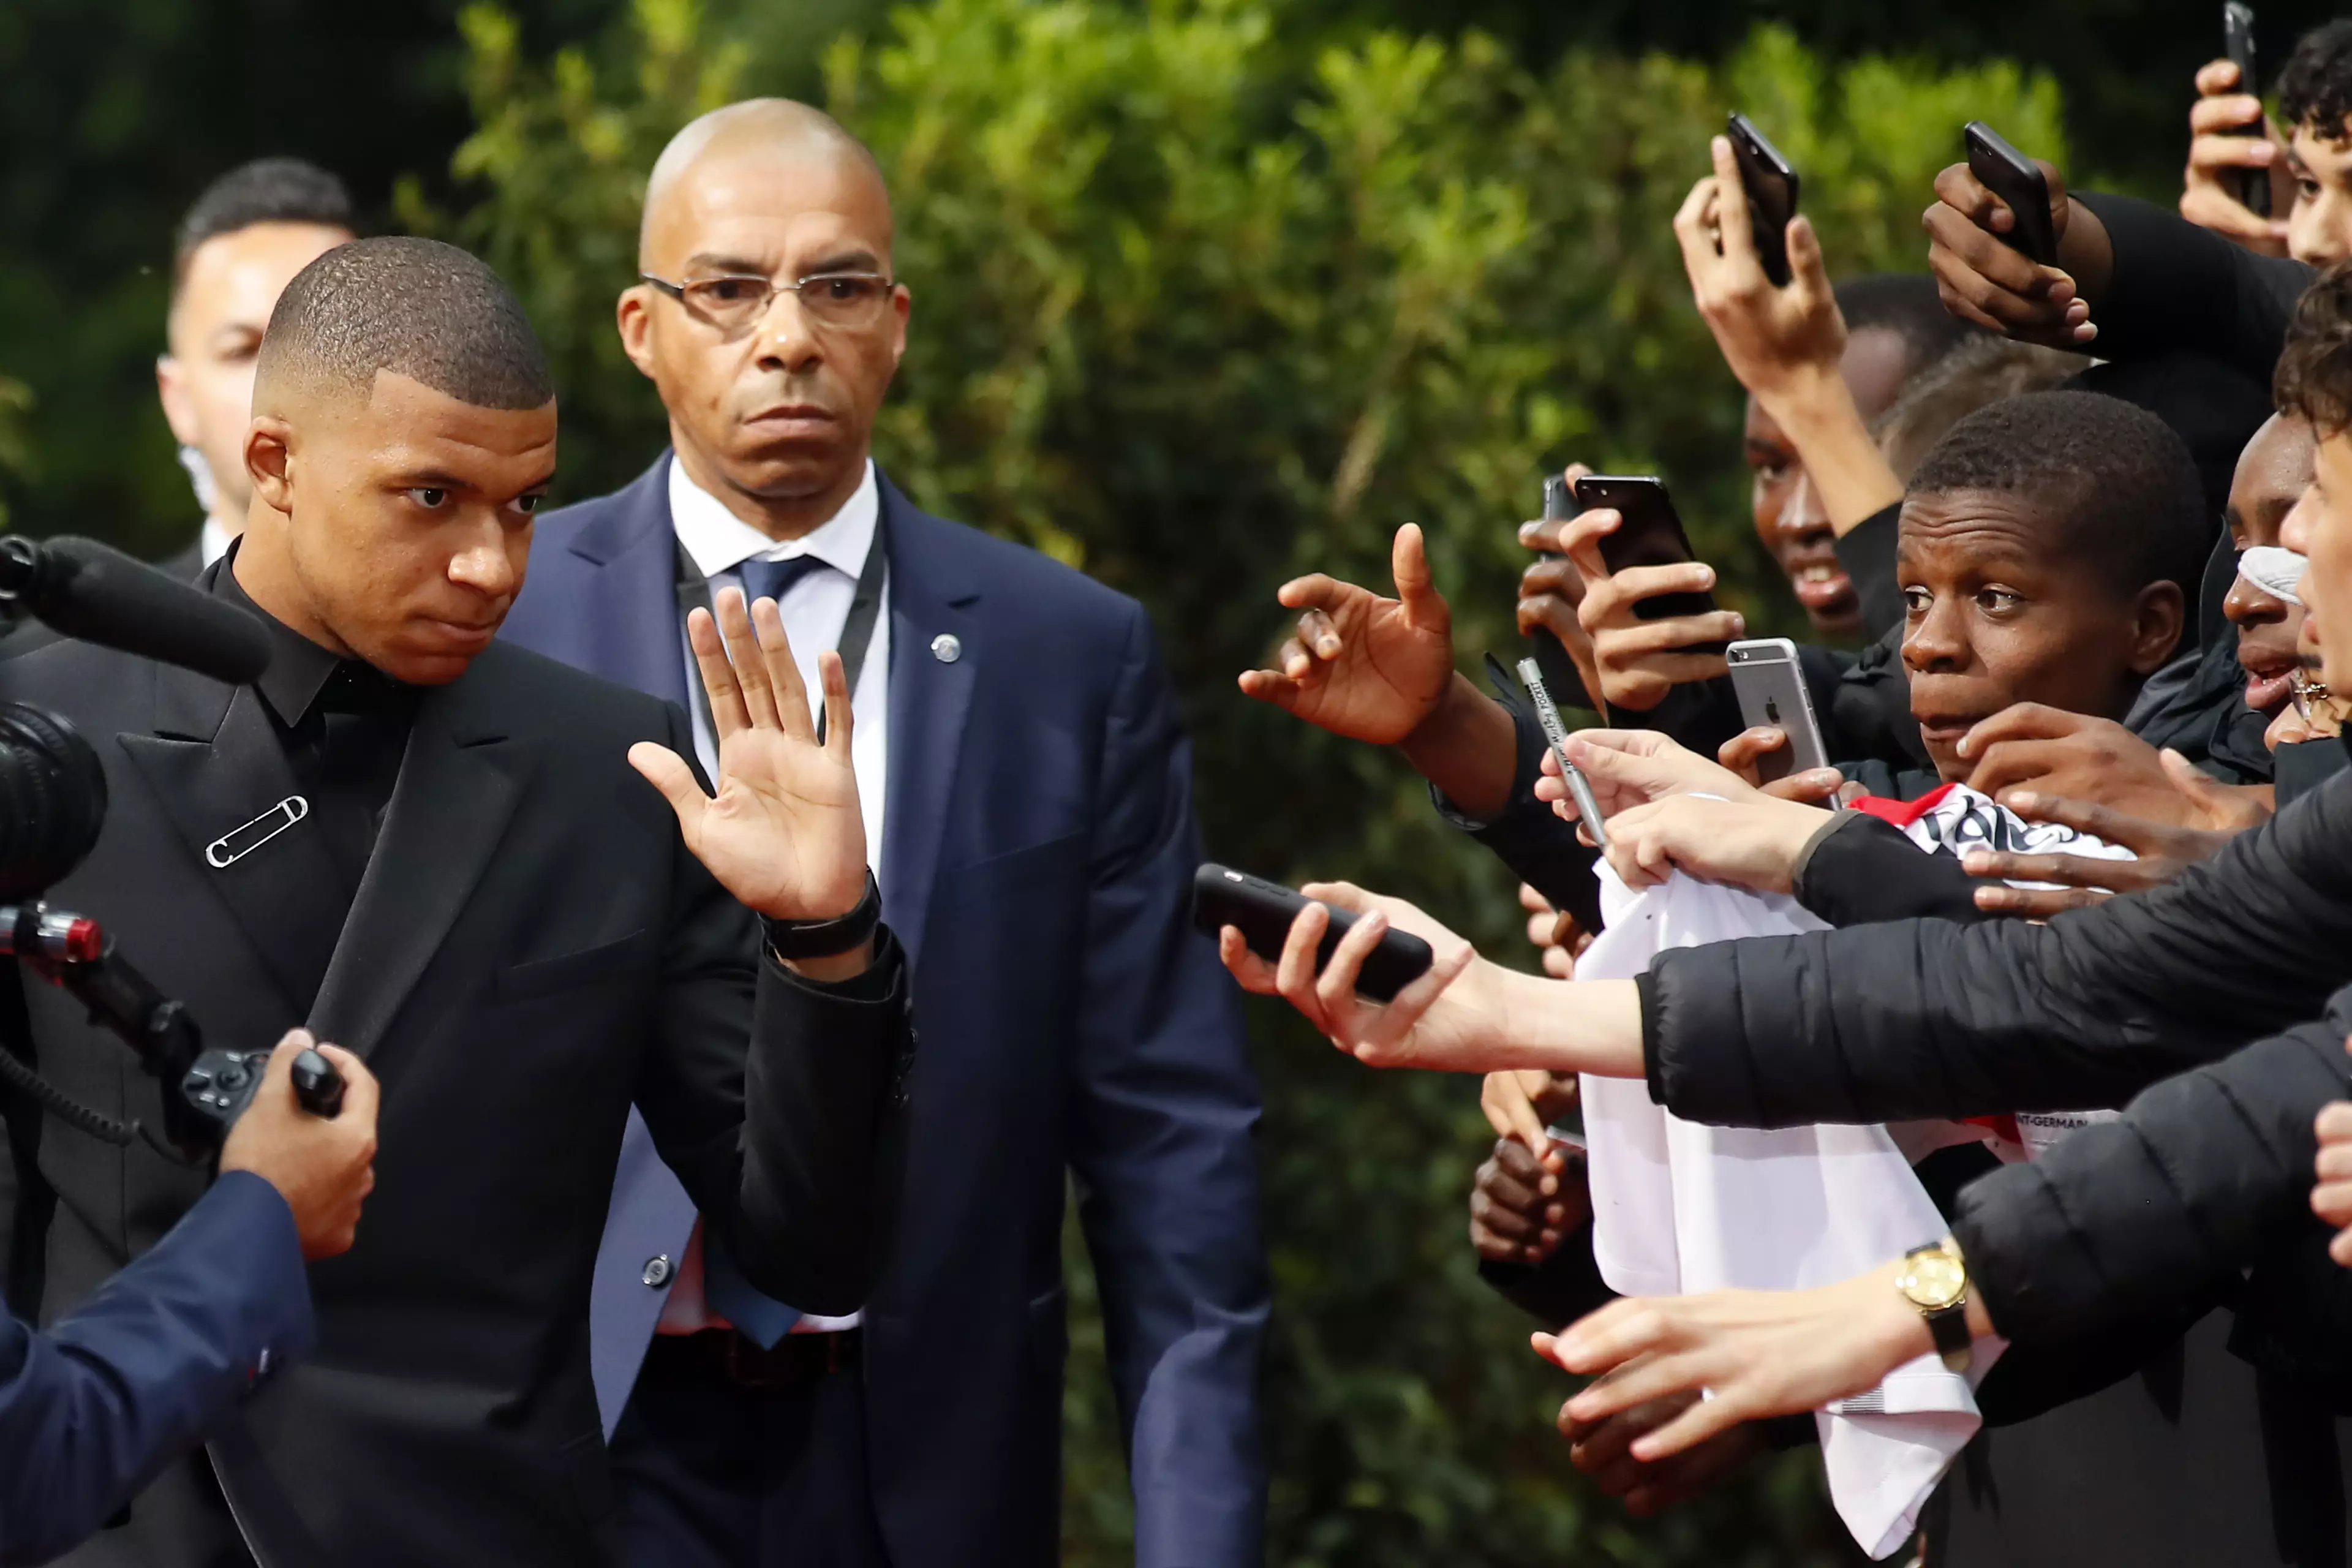 Mbappe arrives at the award ceremony. Image: PA Images